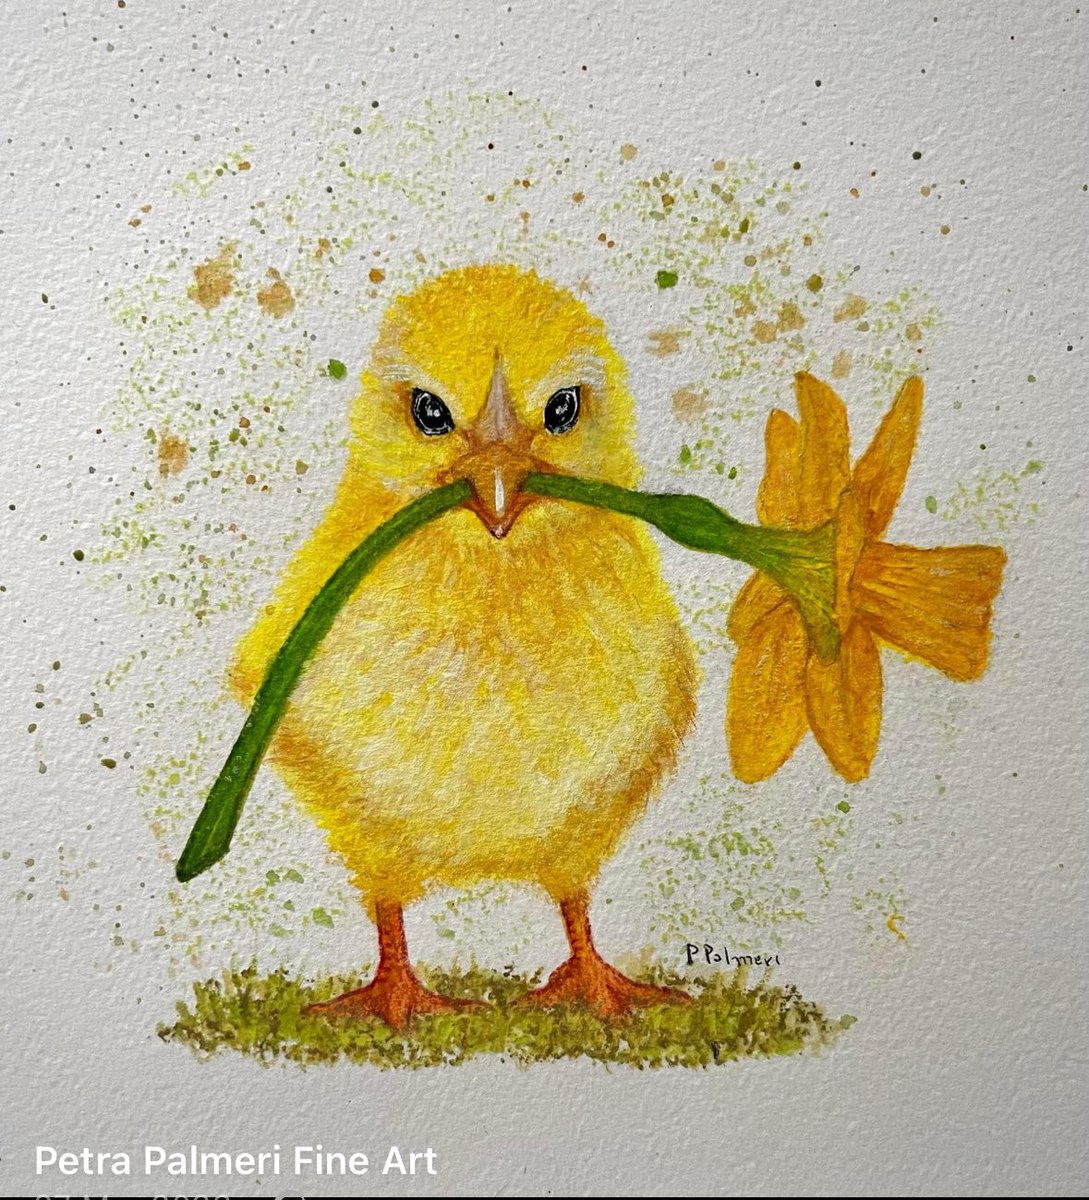 Wishing everyone a happy weekend! 
#cards #greetingcards 
#daffodils #daffodilseason #chicks #petrapalmeriart #fans #followers #watercolourpainting #greetingcarddesign #greetingcardsforsale #guernsey